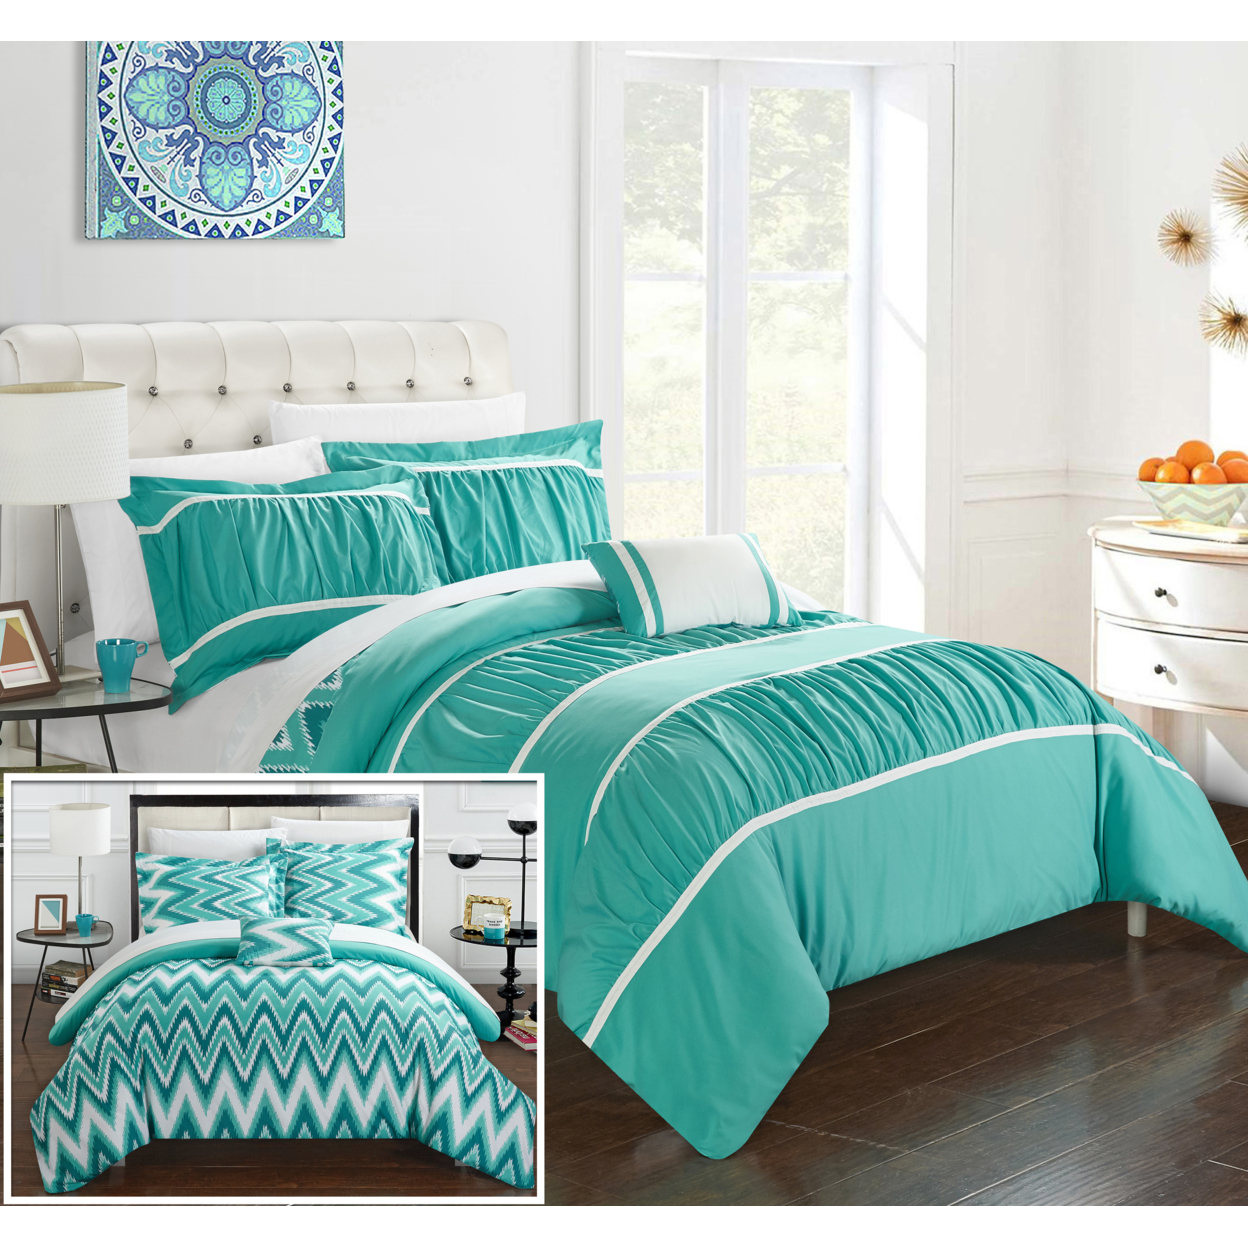 4 Or 3 Piece Lucia Pleated & Ruffled With Chevron REVERSIBLE Backing Comforter Set - Turquoise, Full/Queen